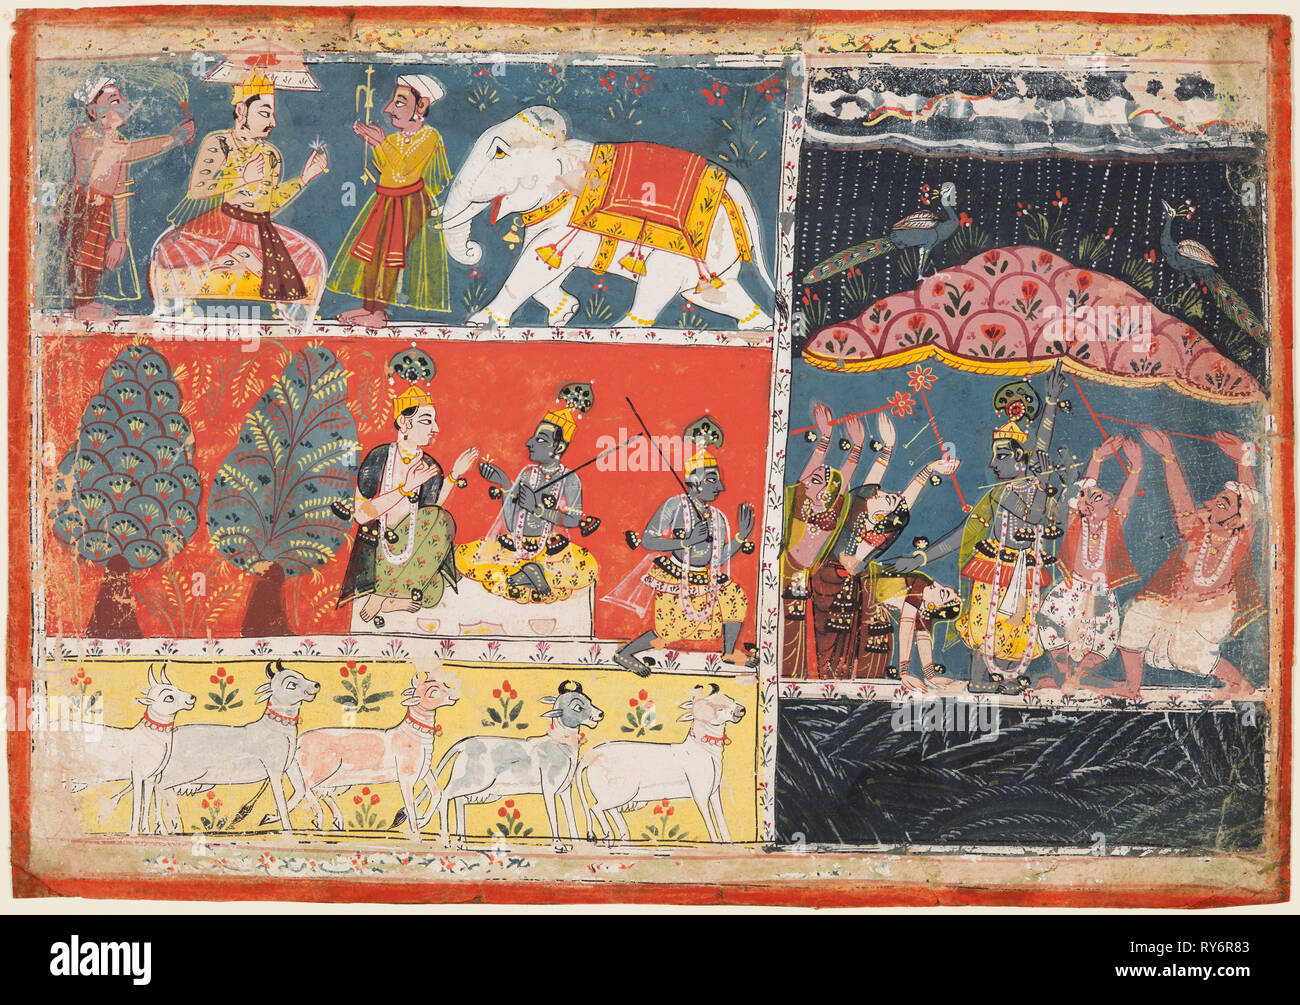 A page from the Bhagavata Purana: Indra sends a torrent of rain; Krishna lifts Mt. Govardhana, 1686. Central India, Malwa. Color on paper; page: 19.4 x 27.6 cm (7 5/8 x 10 7/8 in Stock Photo